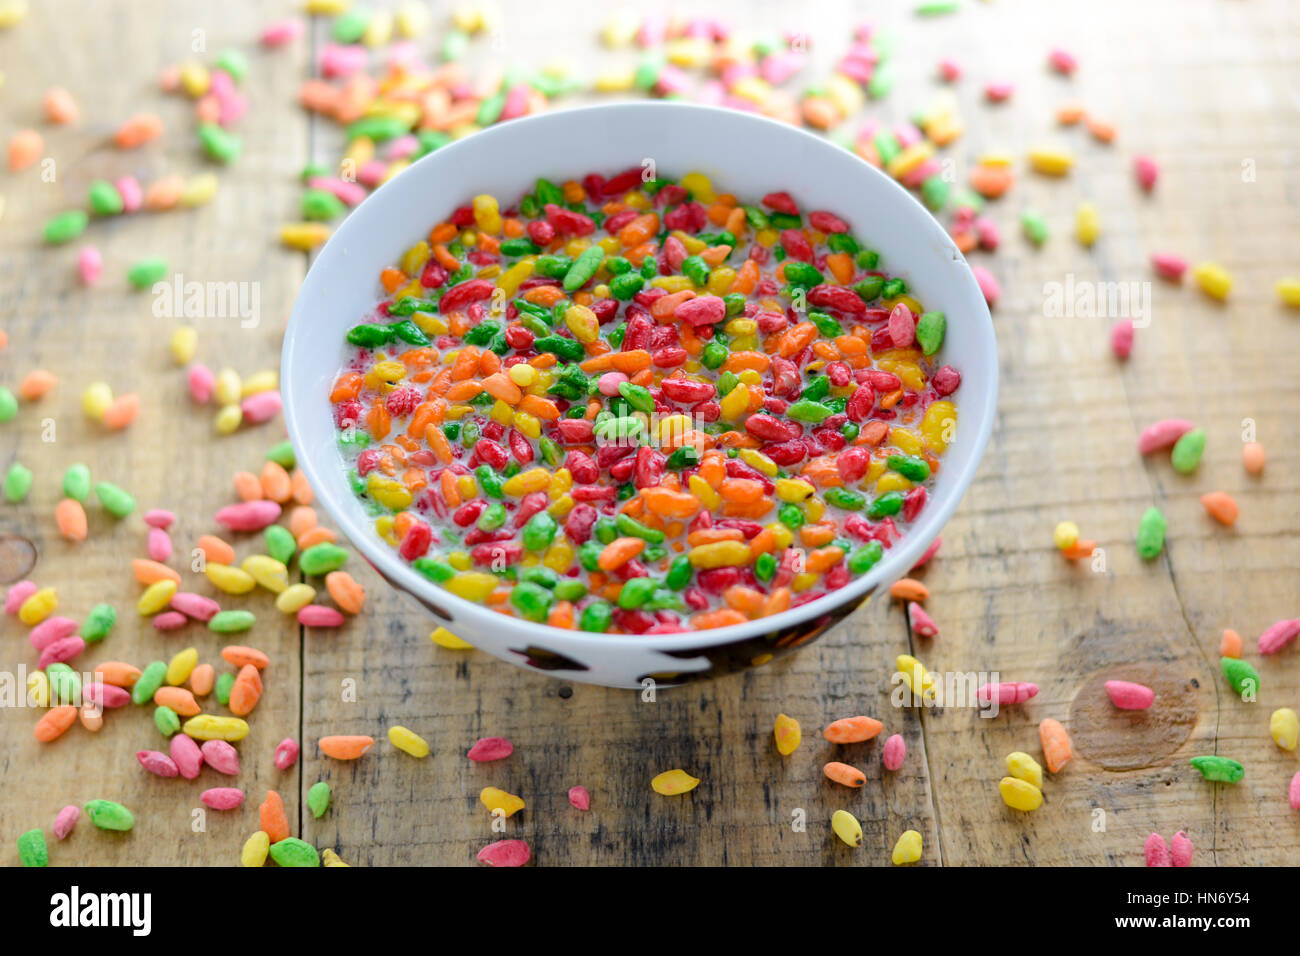 Prepared breakfast with milk and colorful puffed rice in the bowl with spilled rice in the background Stock Photo